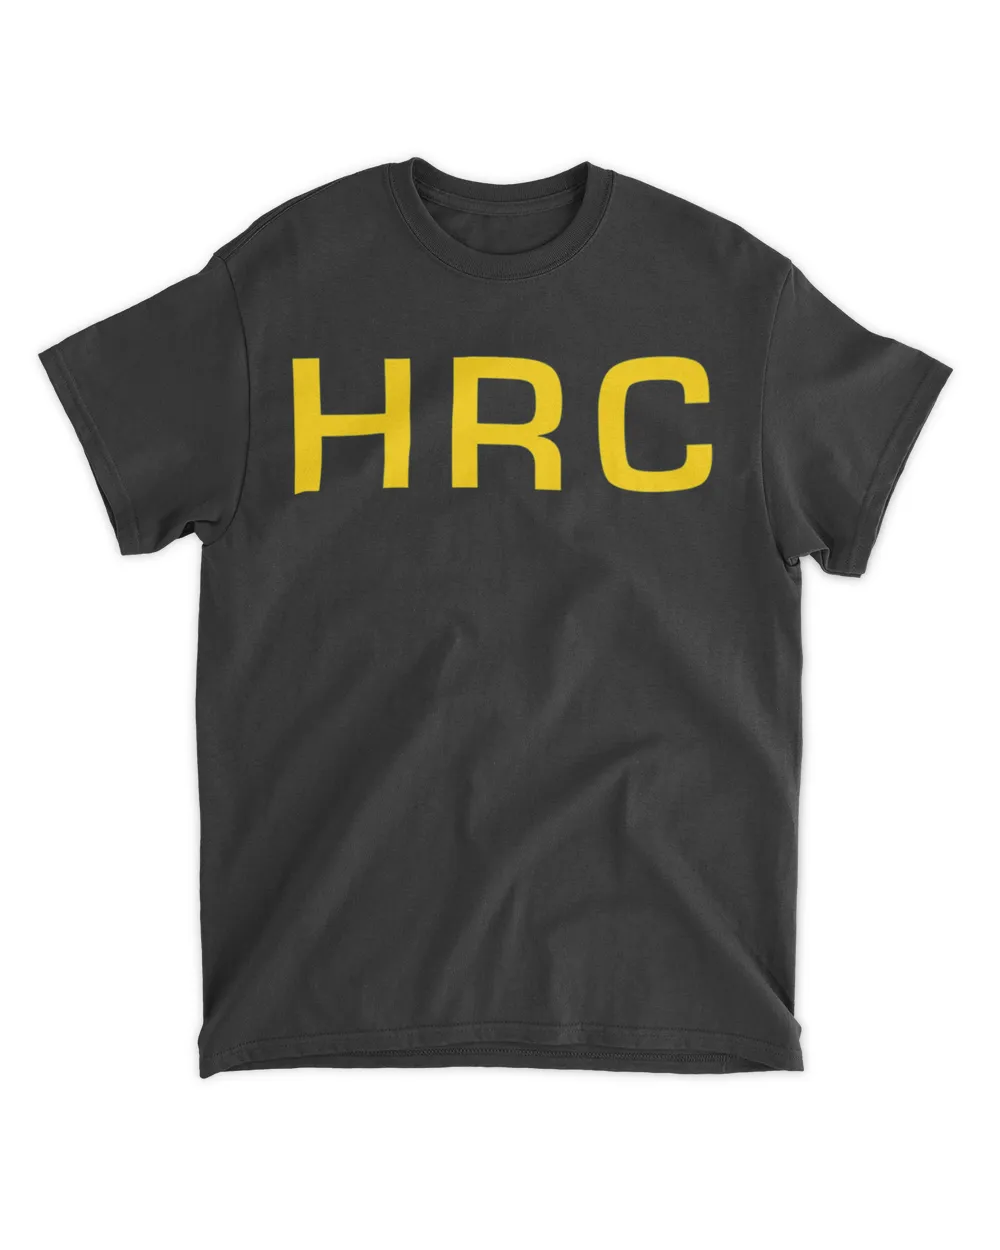 United States Army Human Resources Command HRC T-Shirt